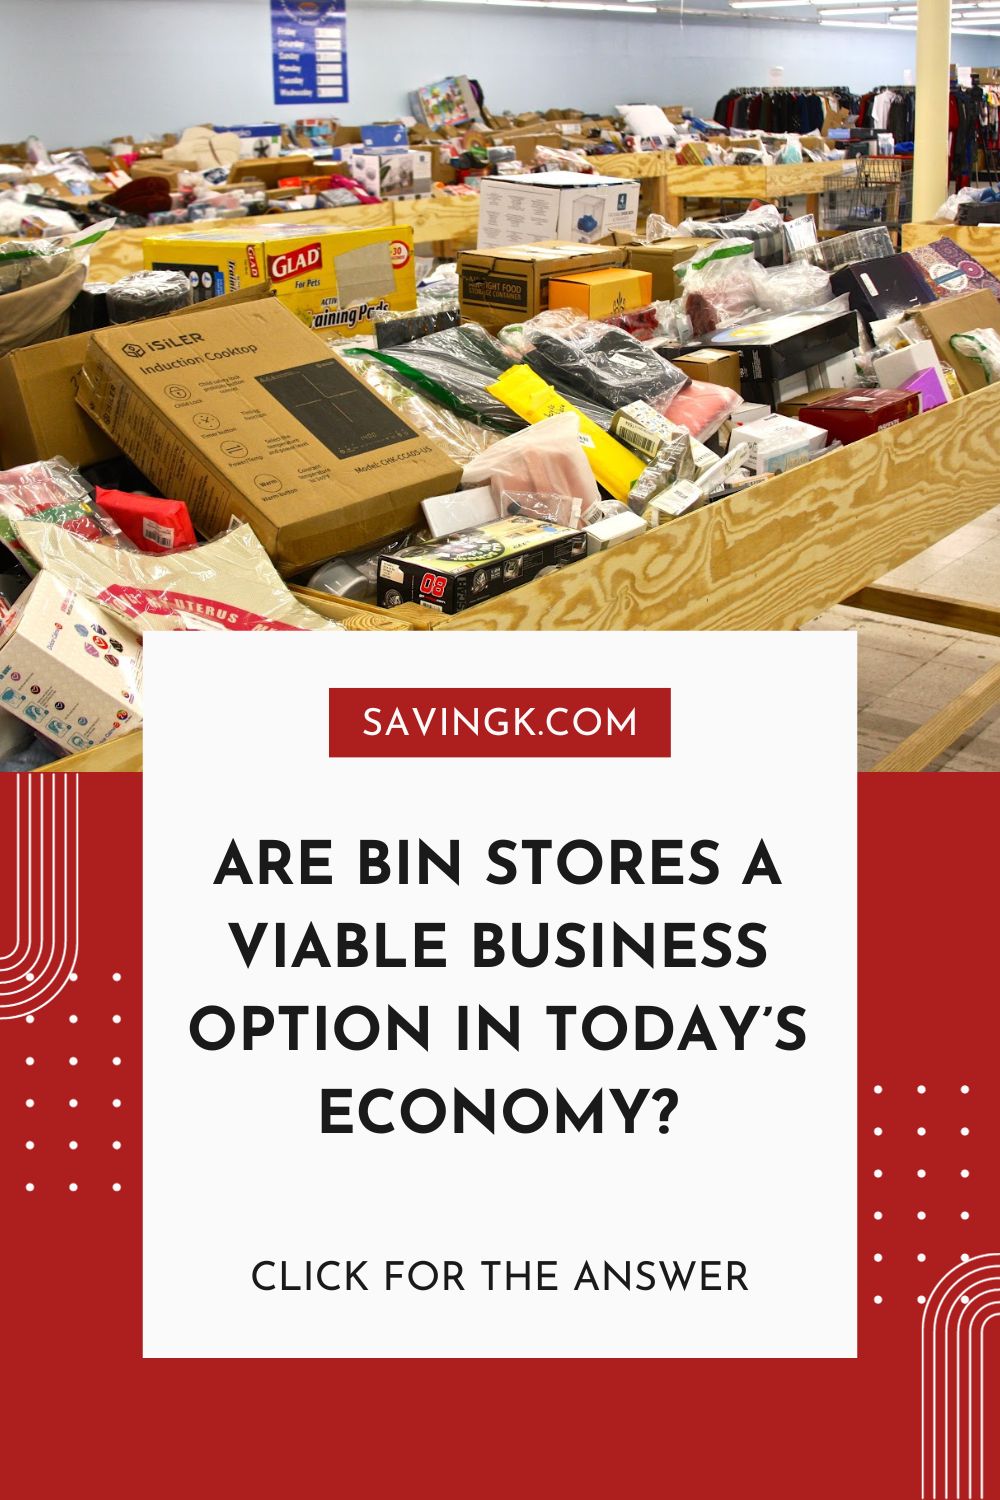 Are Liquidation Bin Stores A Viable Business?